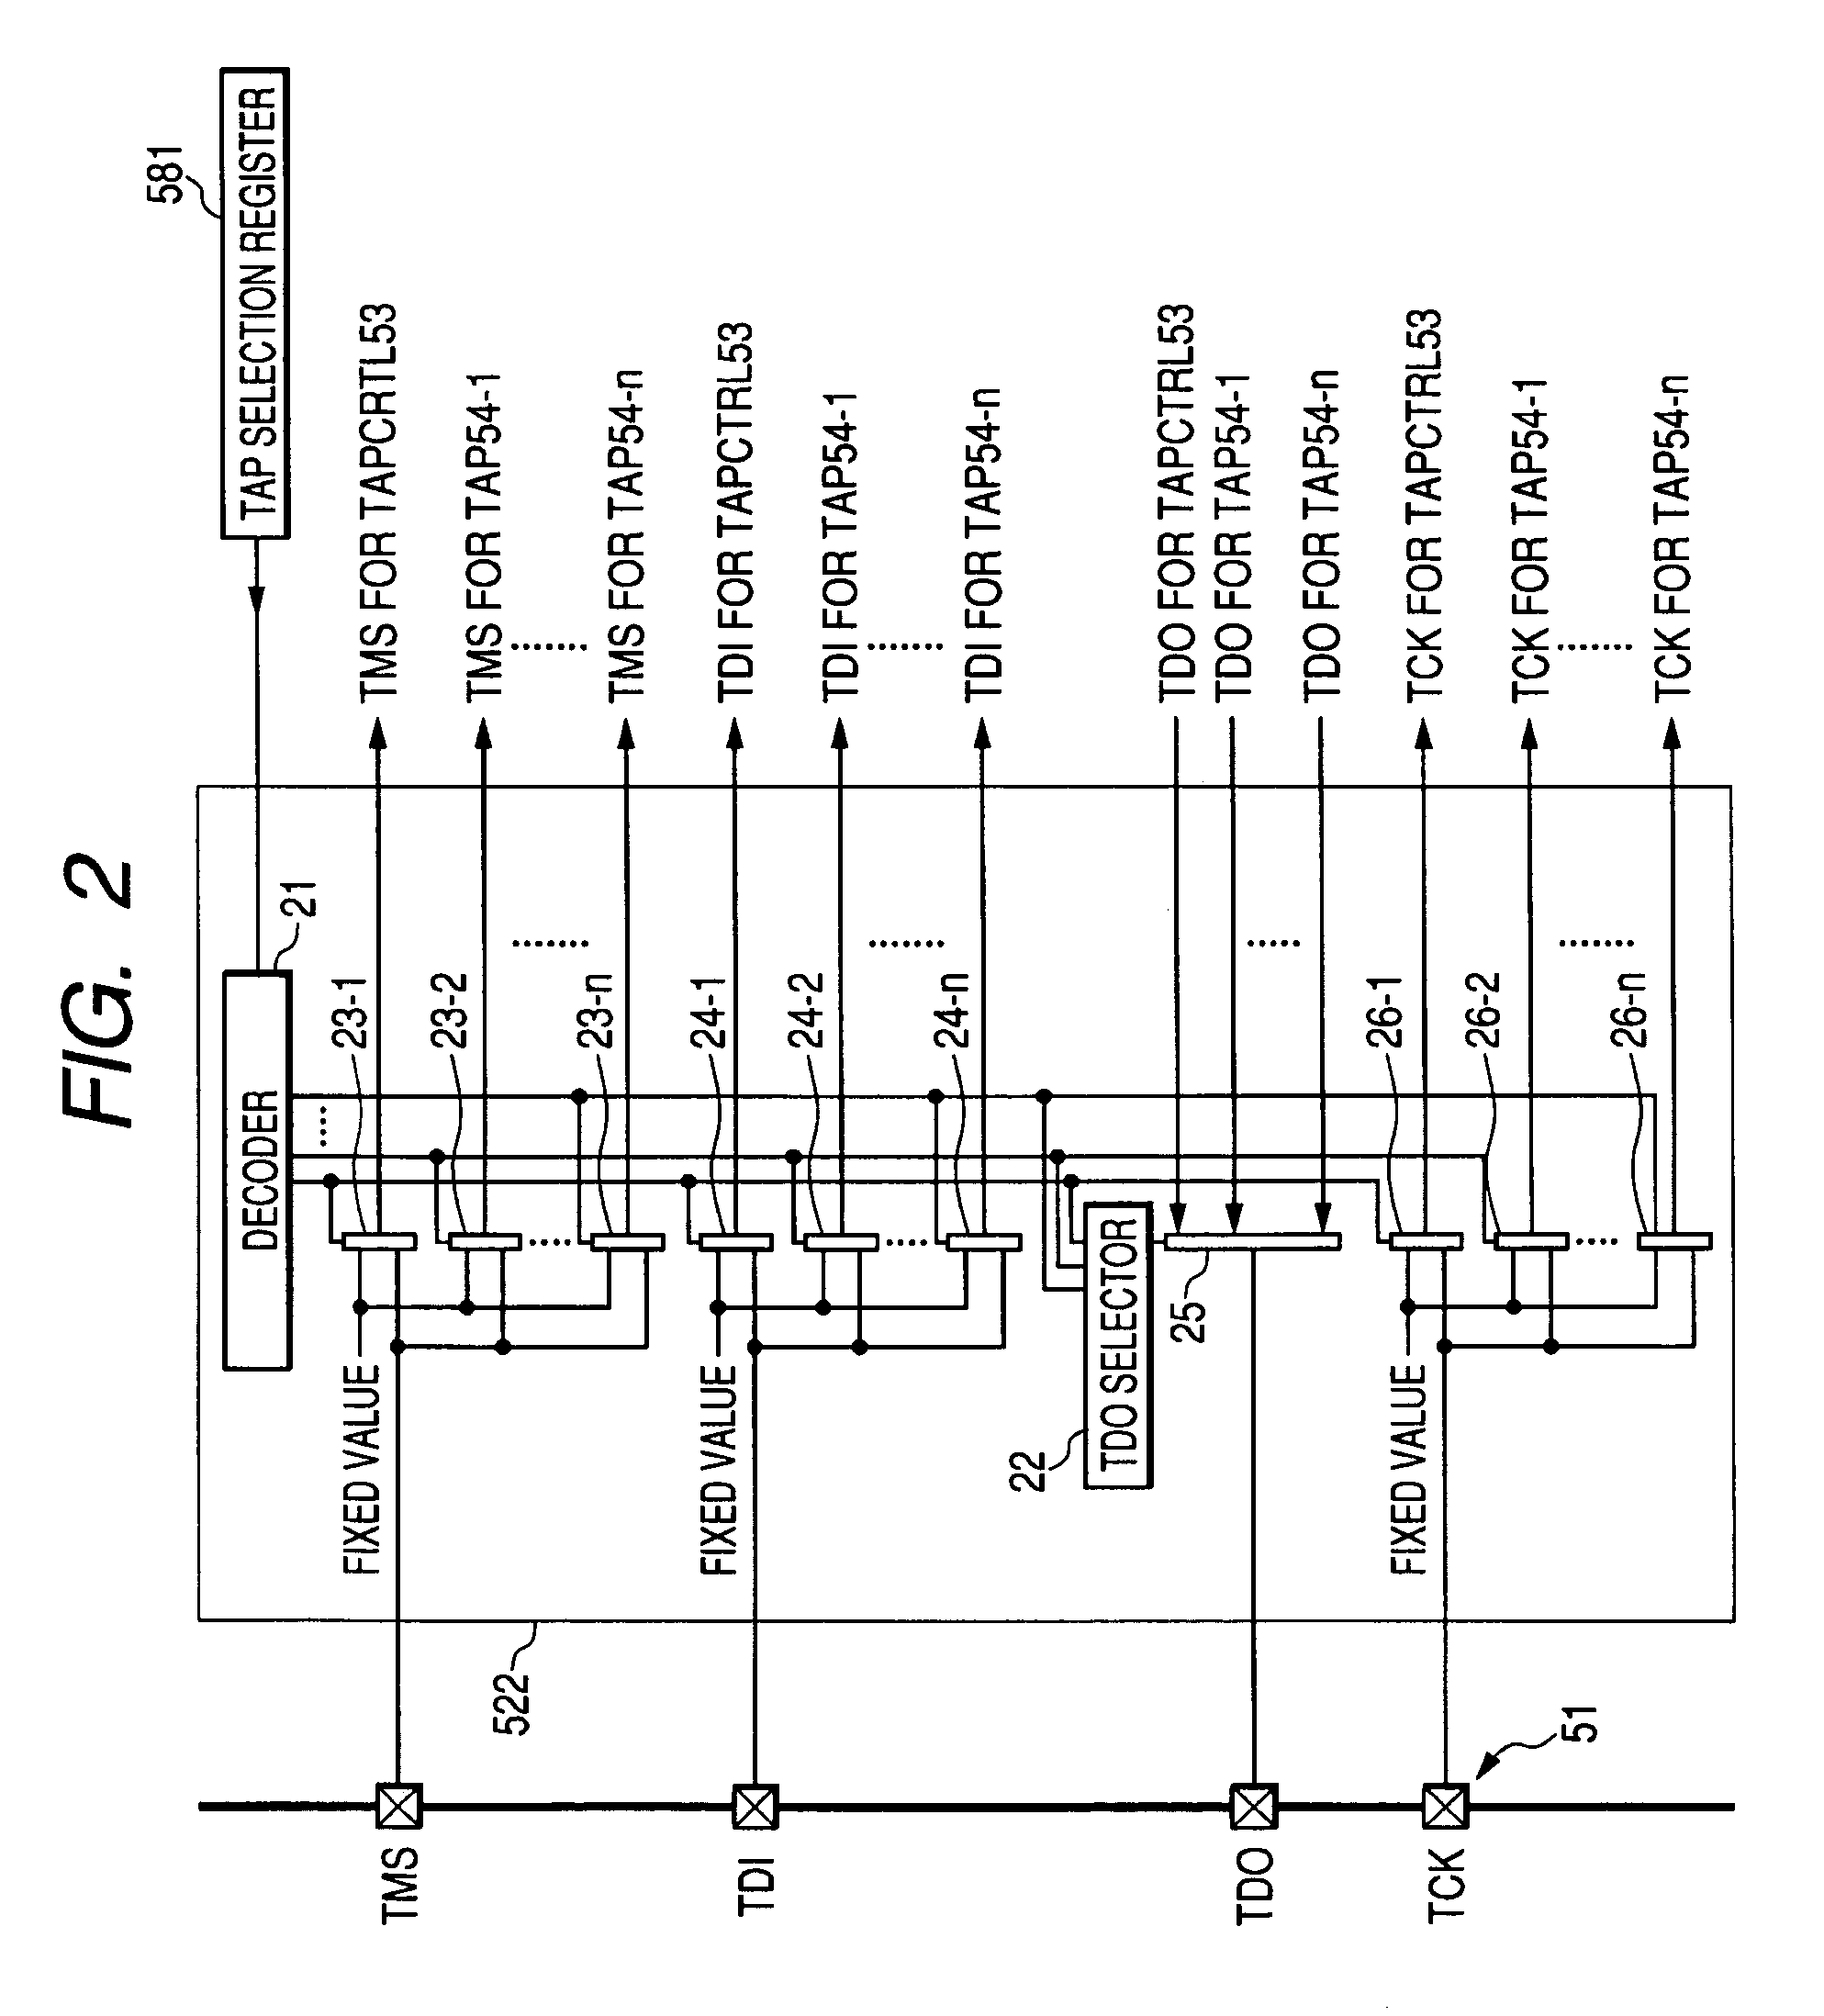 Test access control for plural processors of an integrated circuit